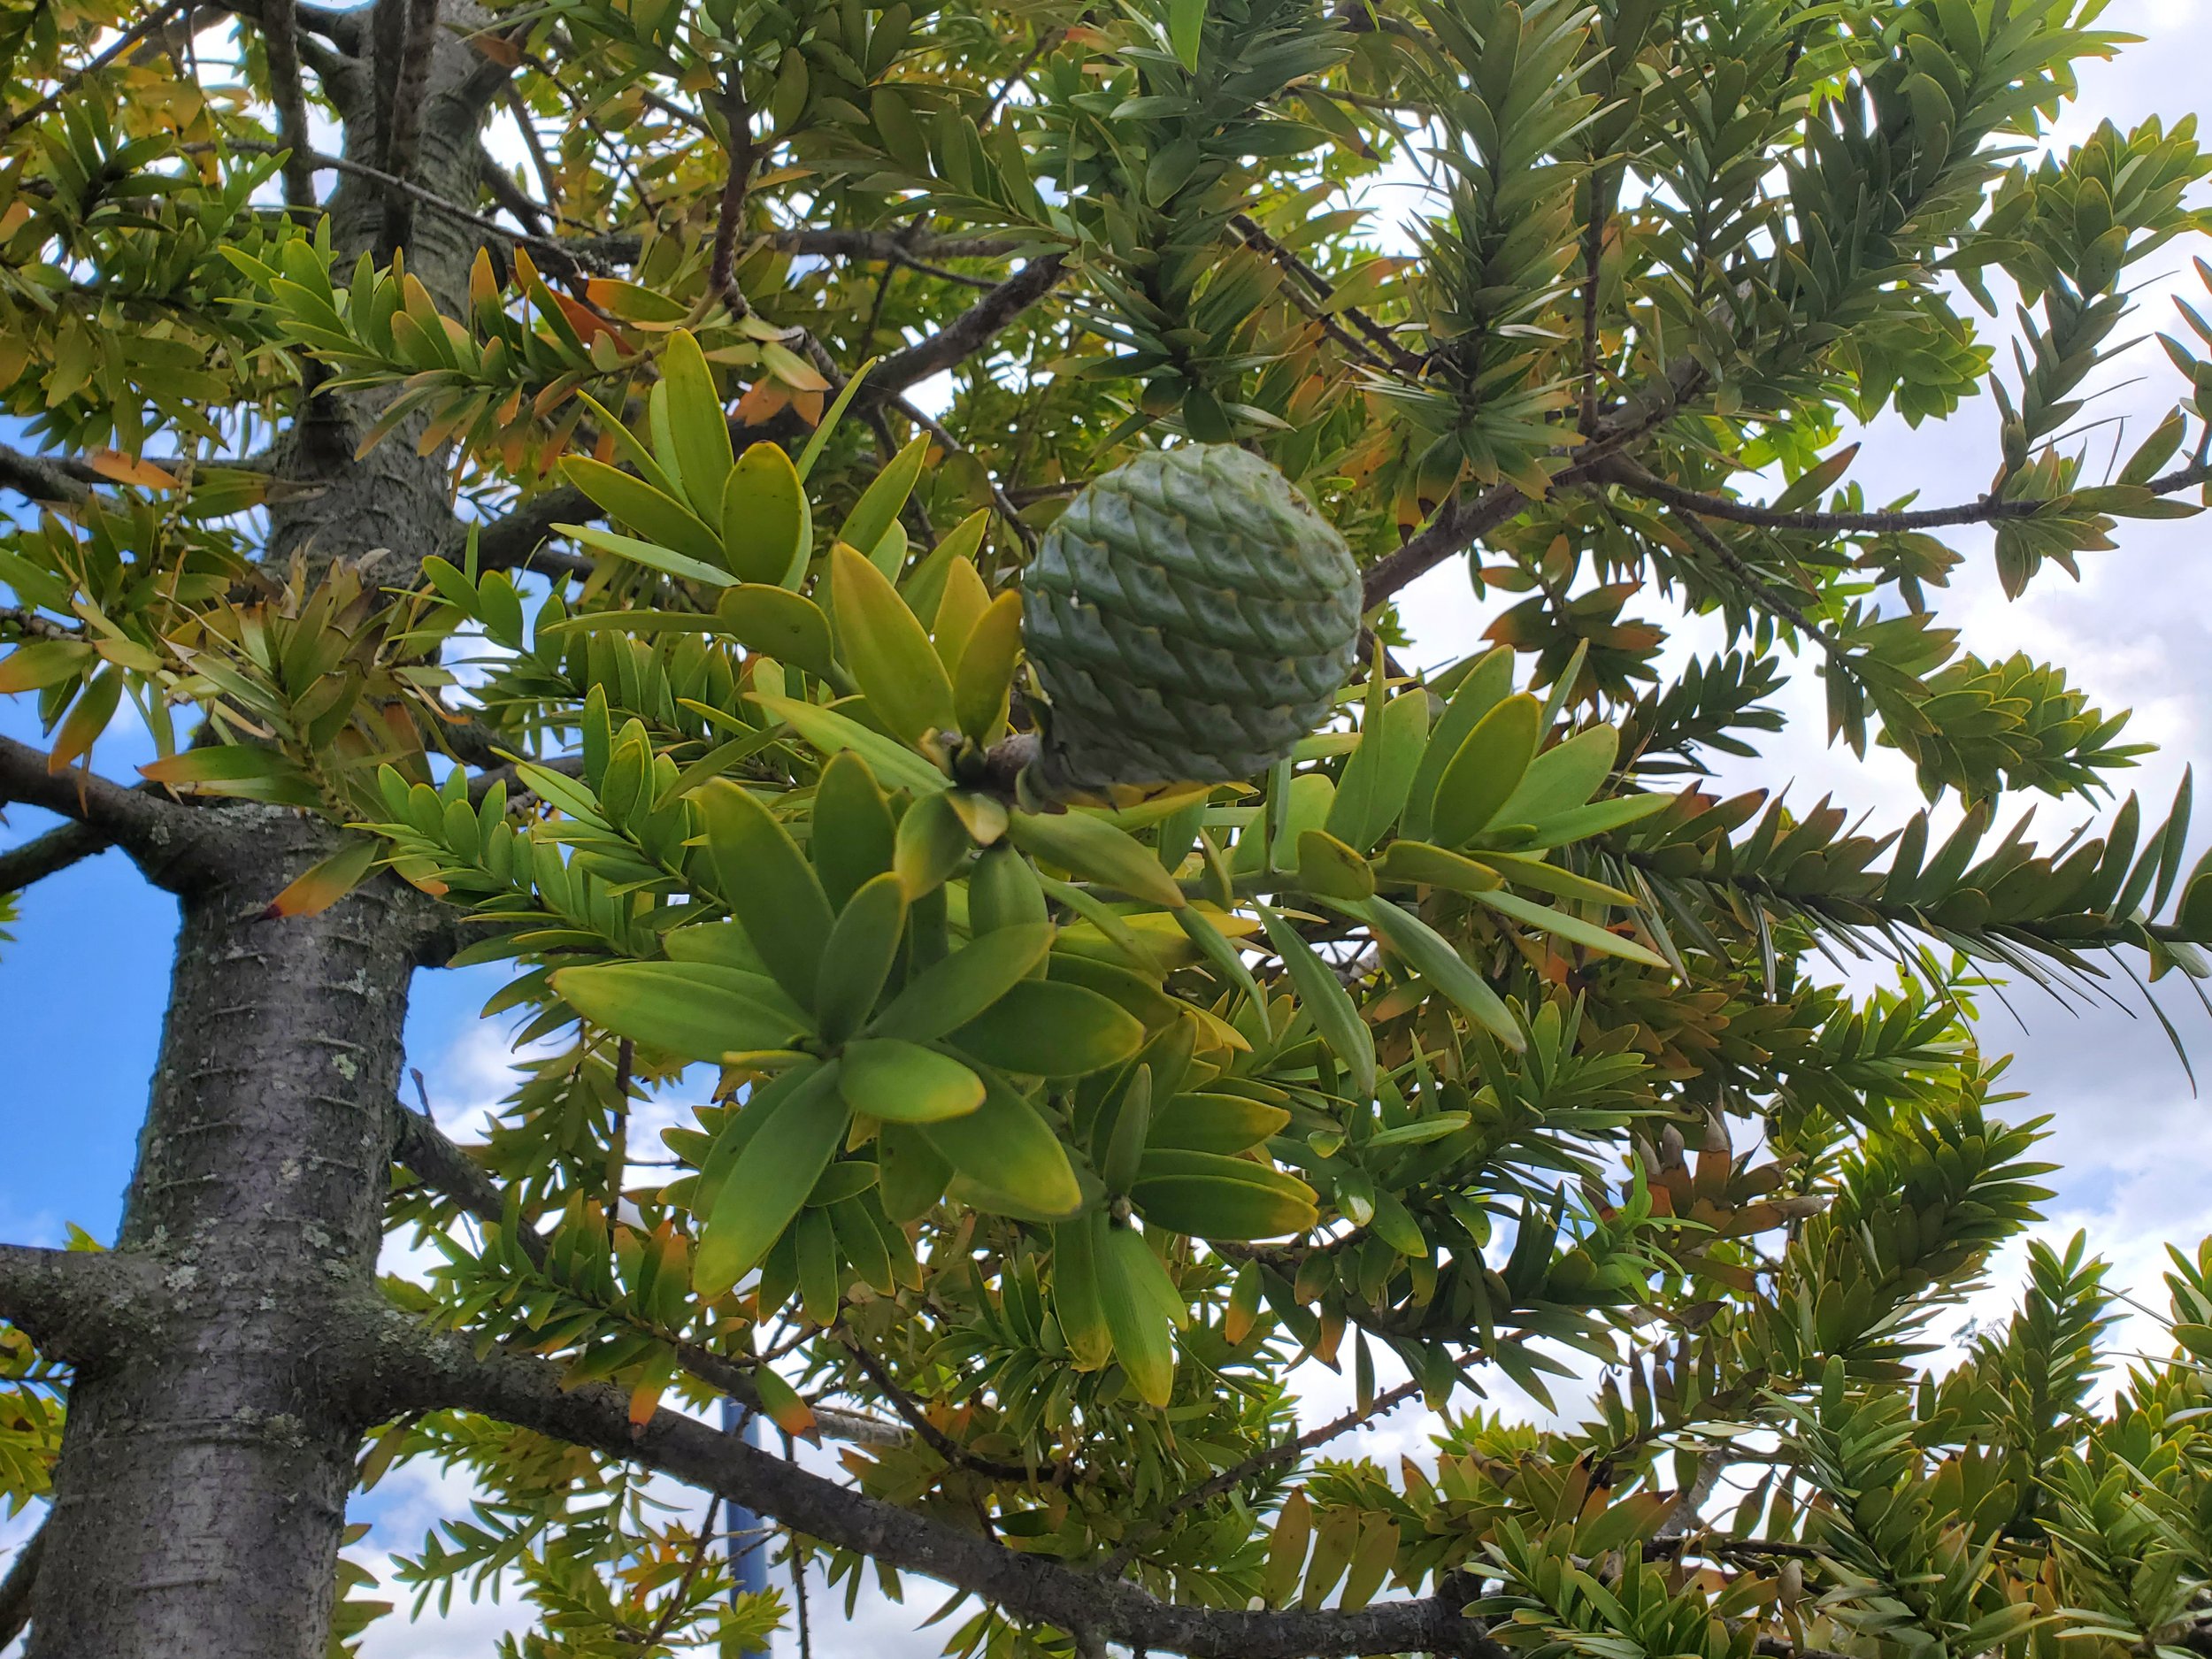 Unlike other conifers, Kauri have leaves instead of needles